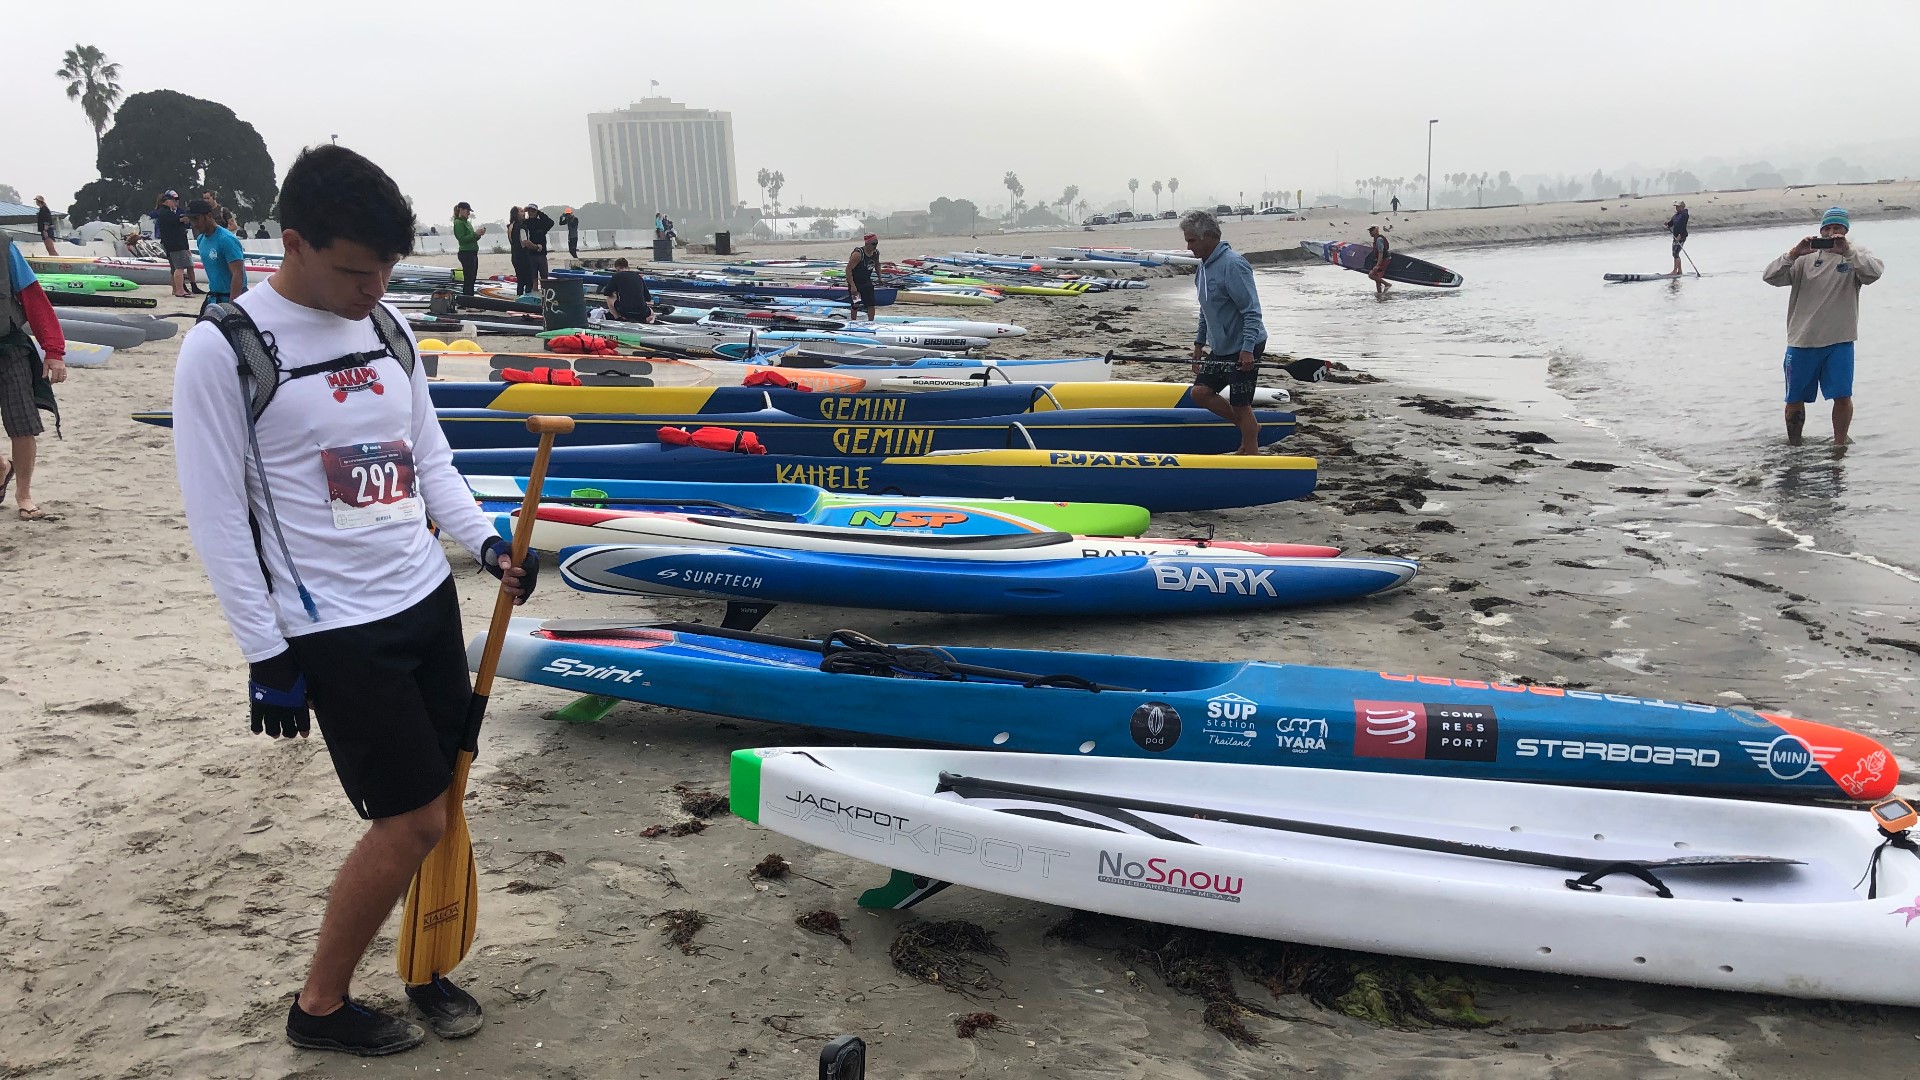 Andrew Skvarla and the Makapo Project race in the HanoHano Ocean Challenge in Mission Bay.